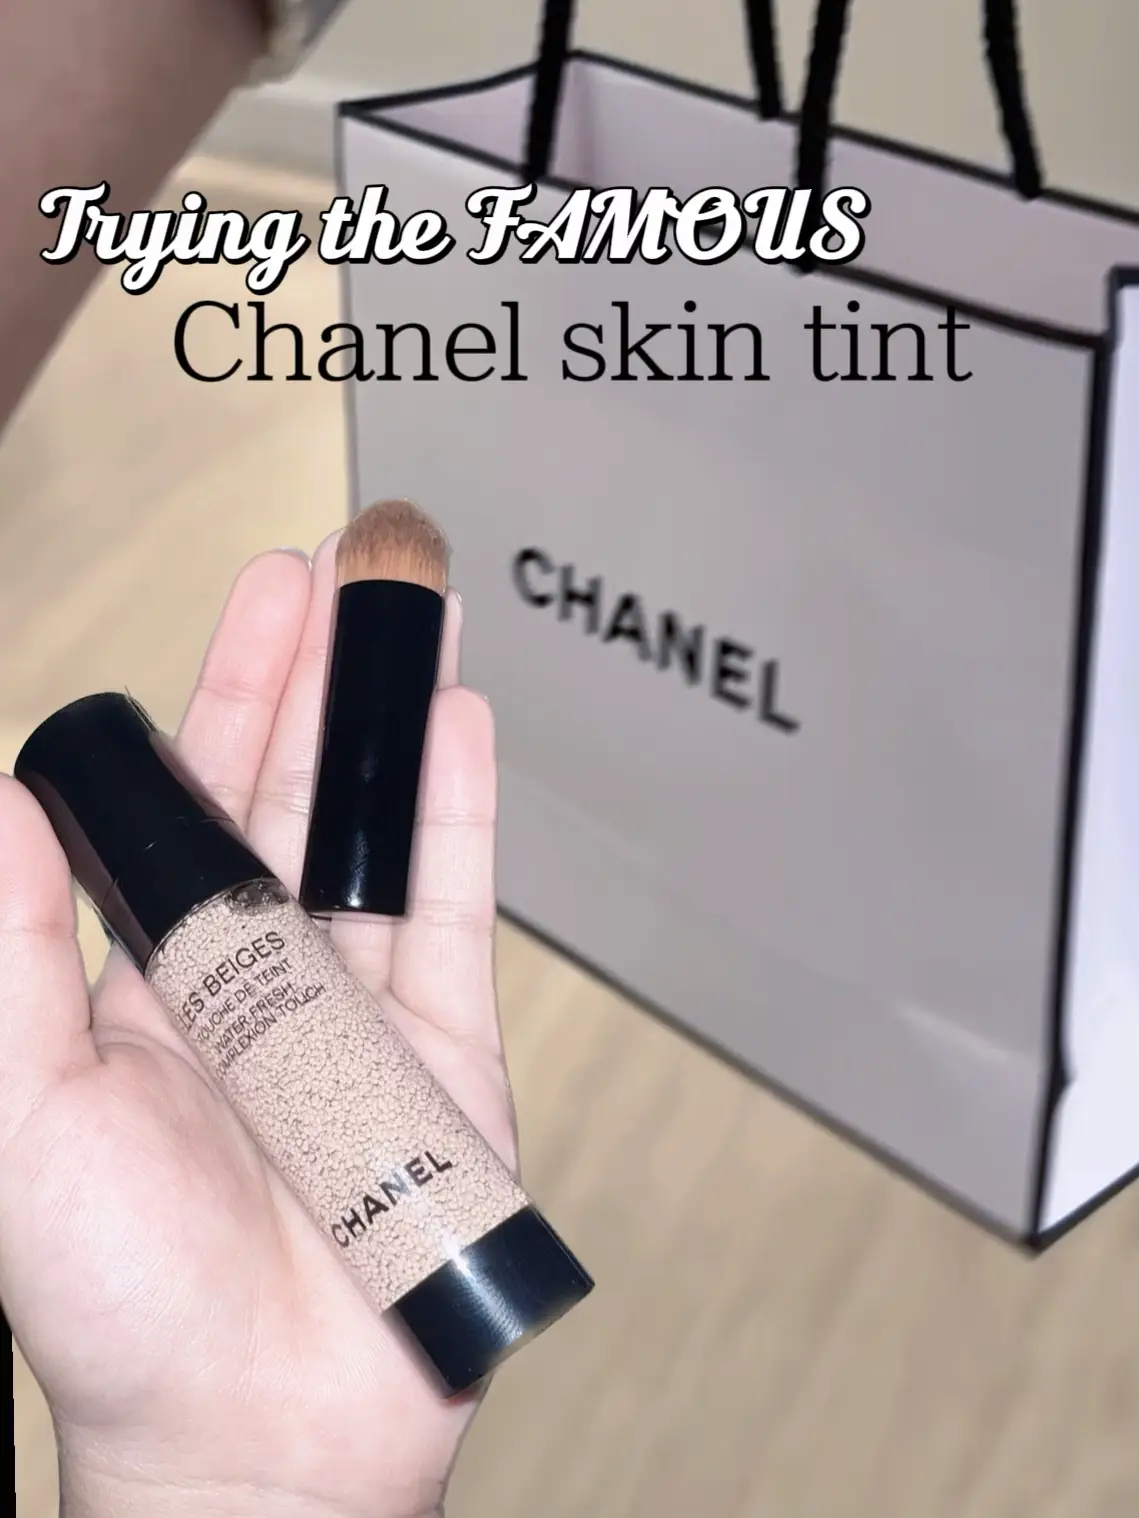 Trying the Famous Chanel skin tint, Gallery posted by Eiyykha